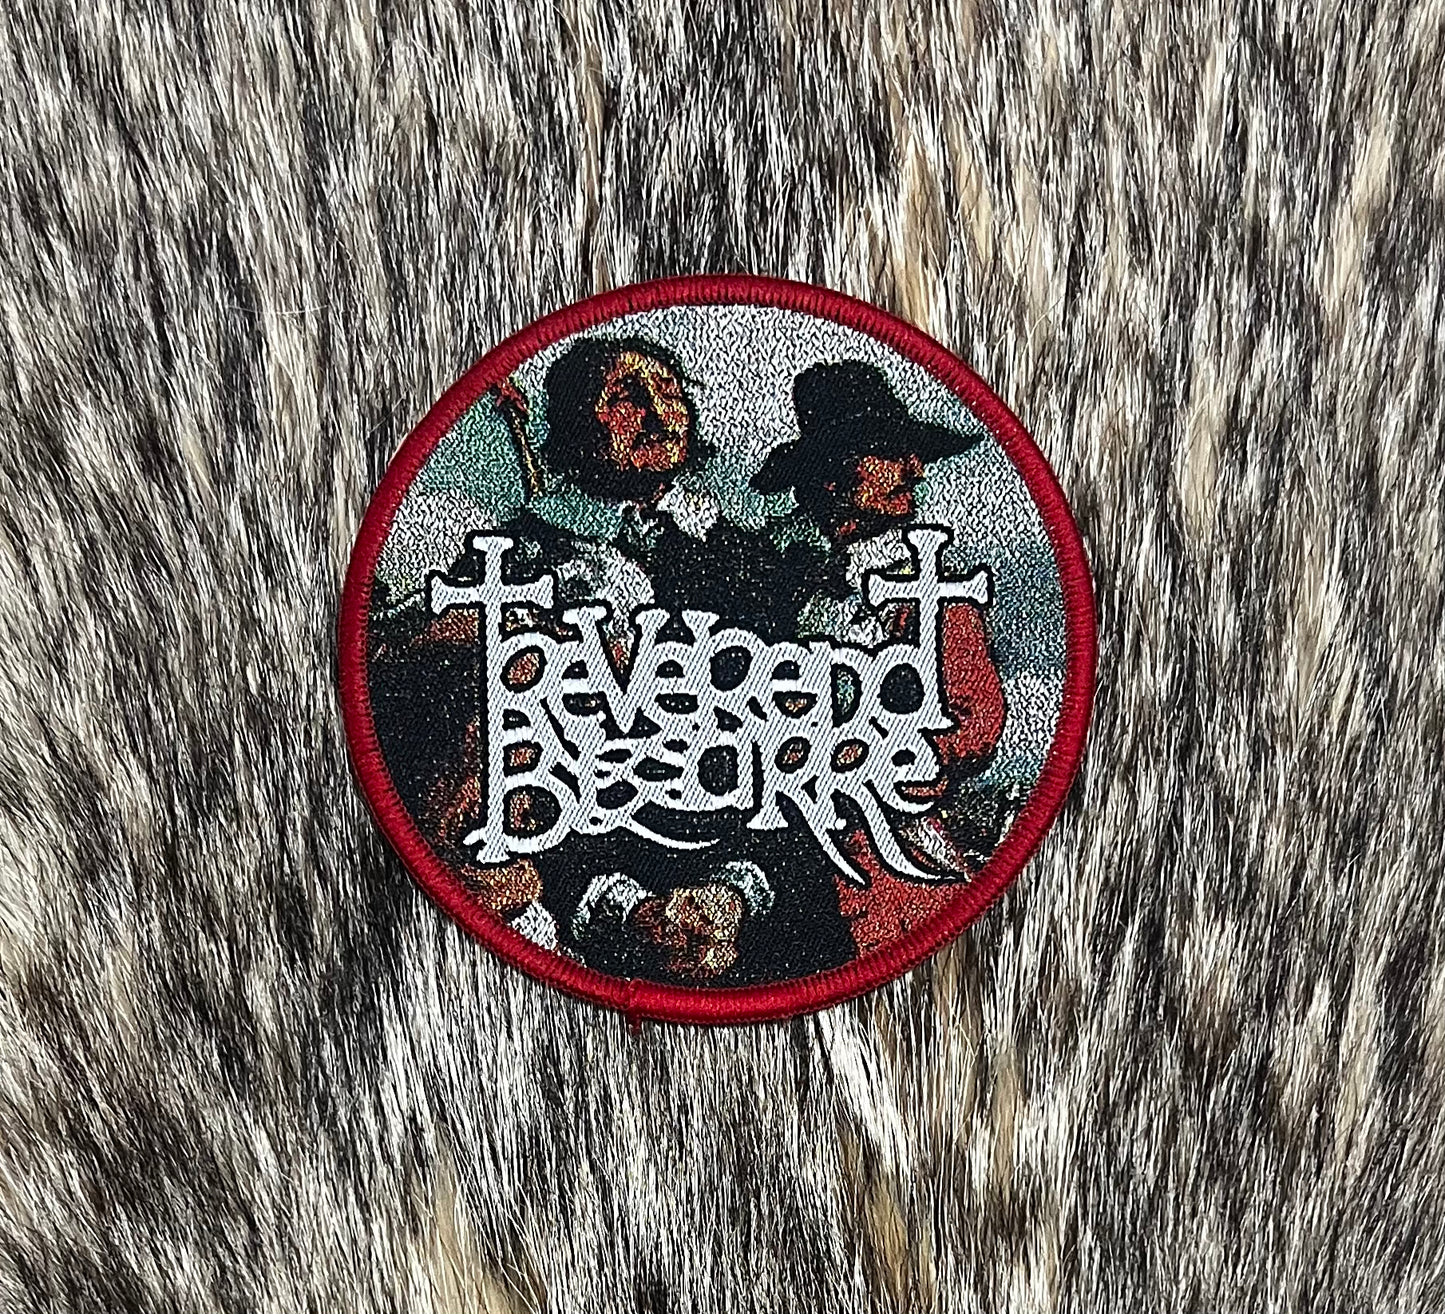 Reverend Bizarre - Crush The Insects Circular Patch